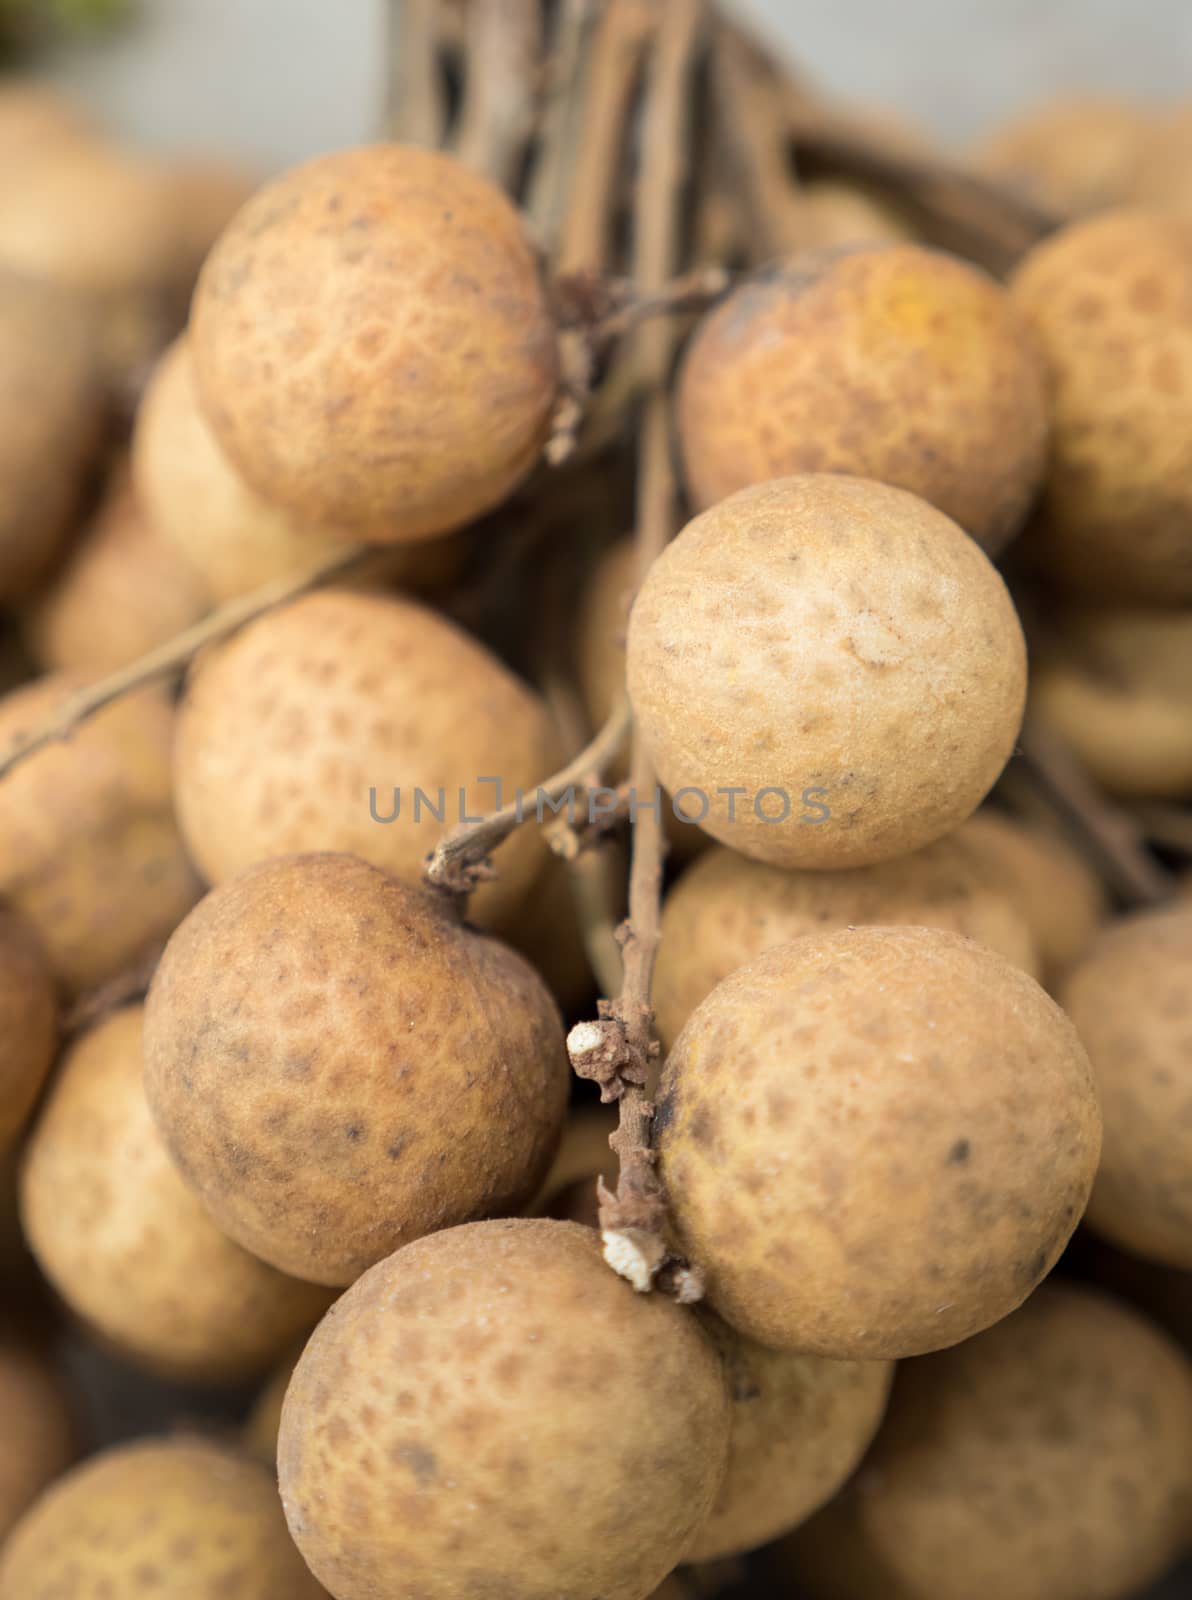 Bunch of Longan Fruits on sell by azamshah72